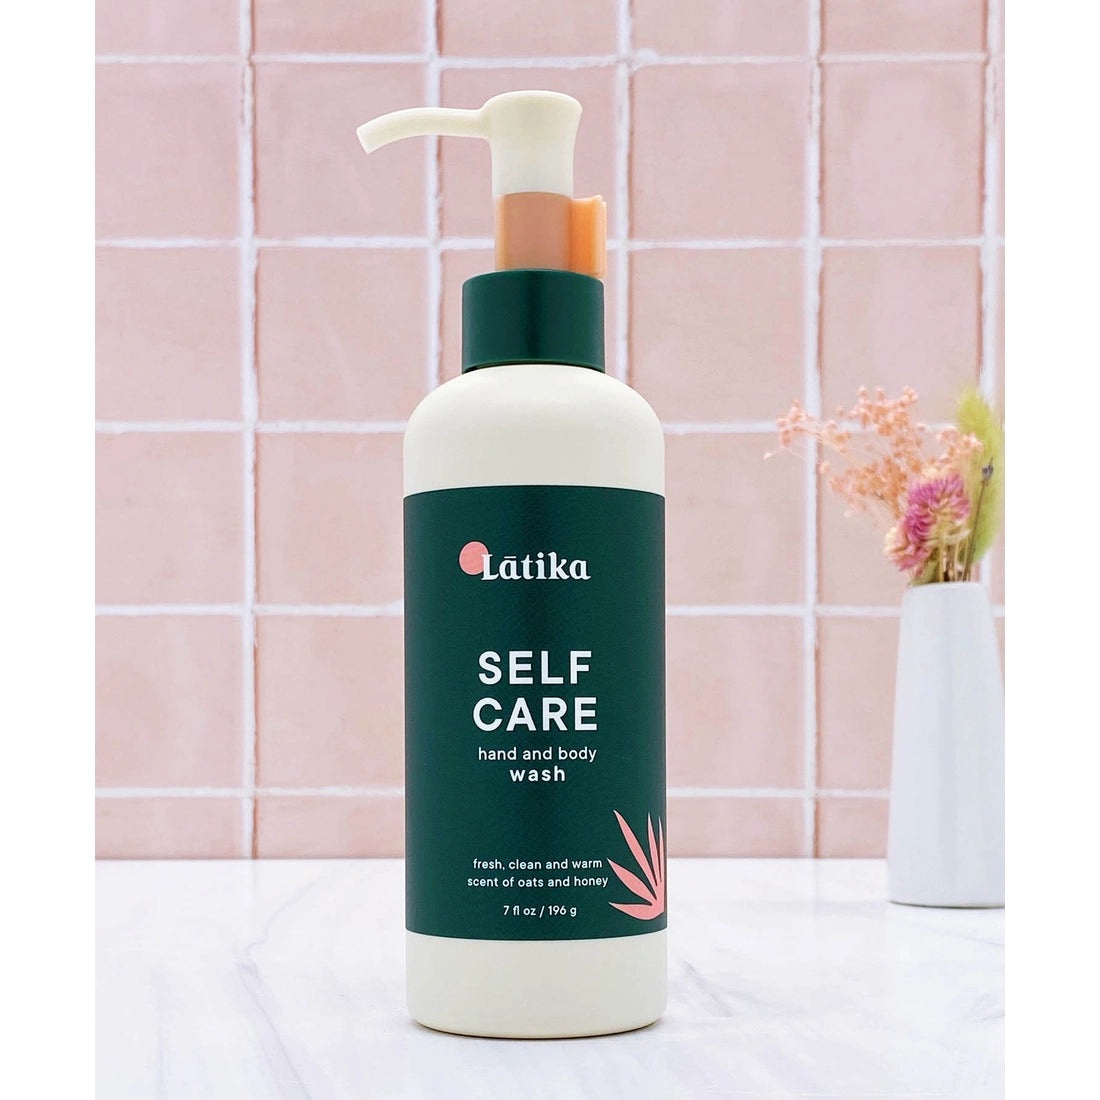 Self Care Hand and Body Wash